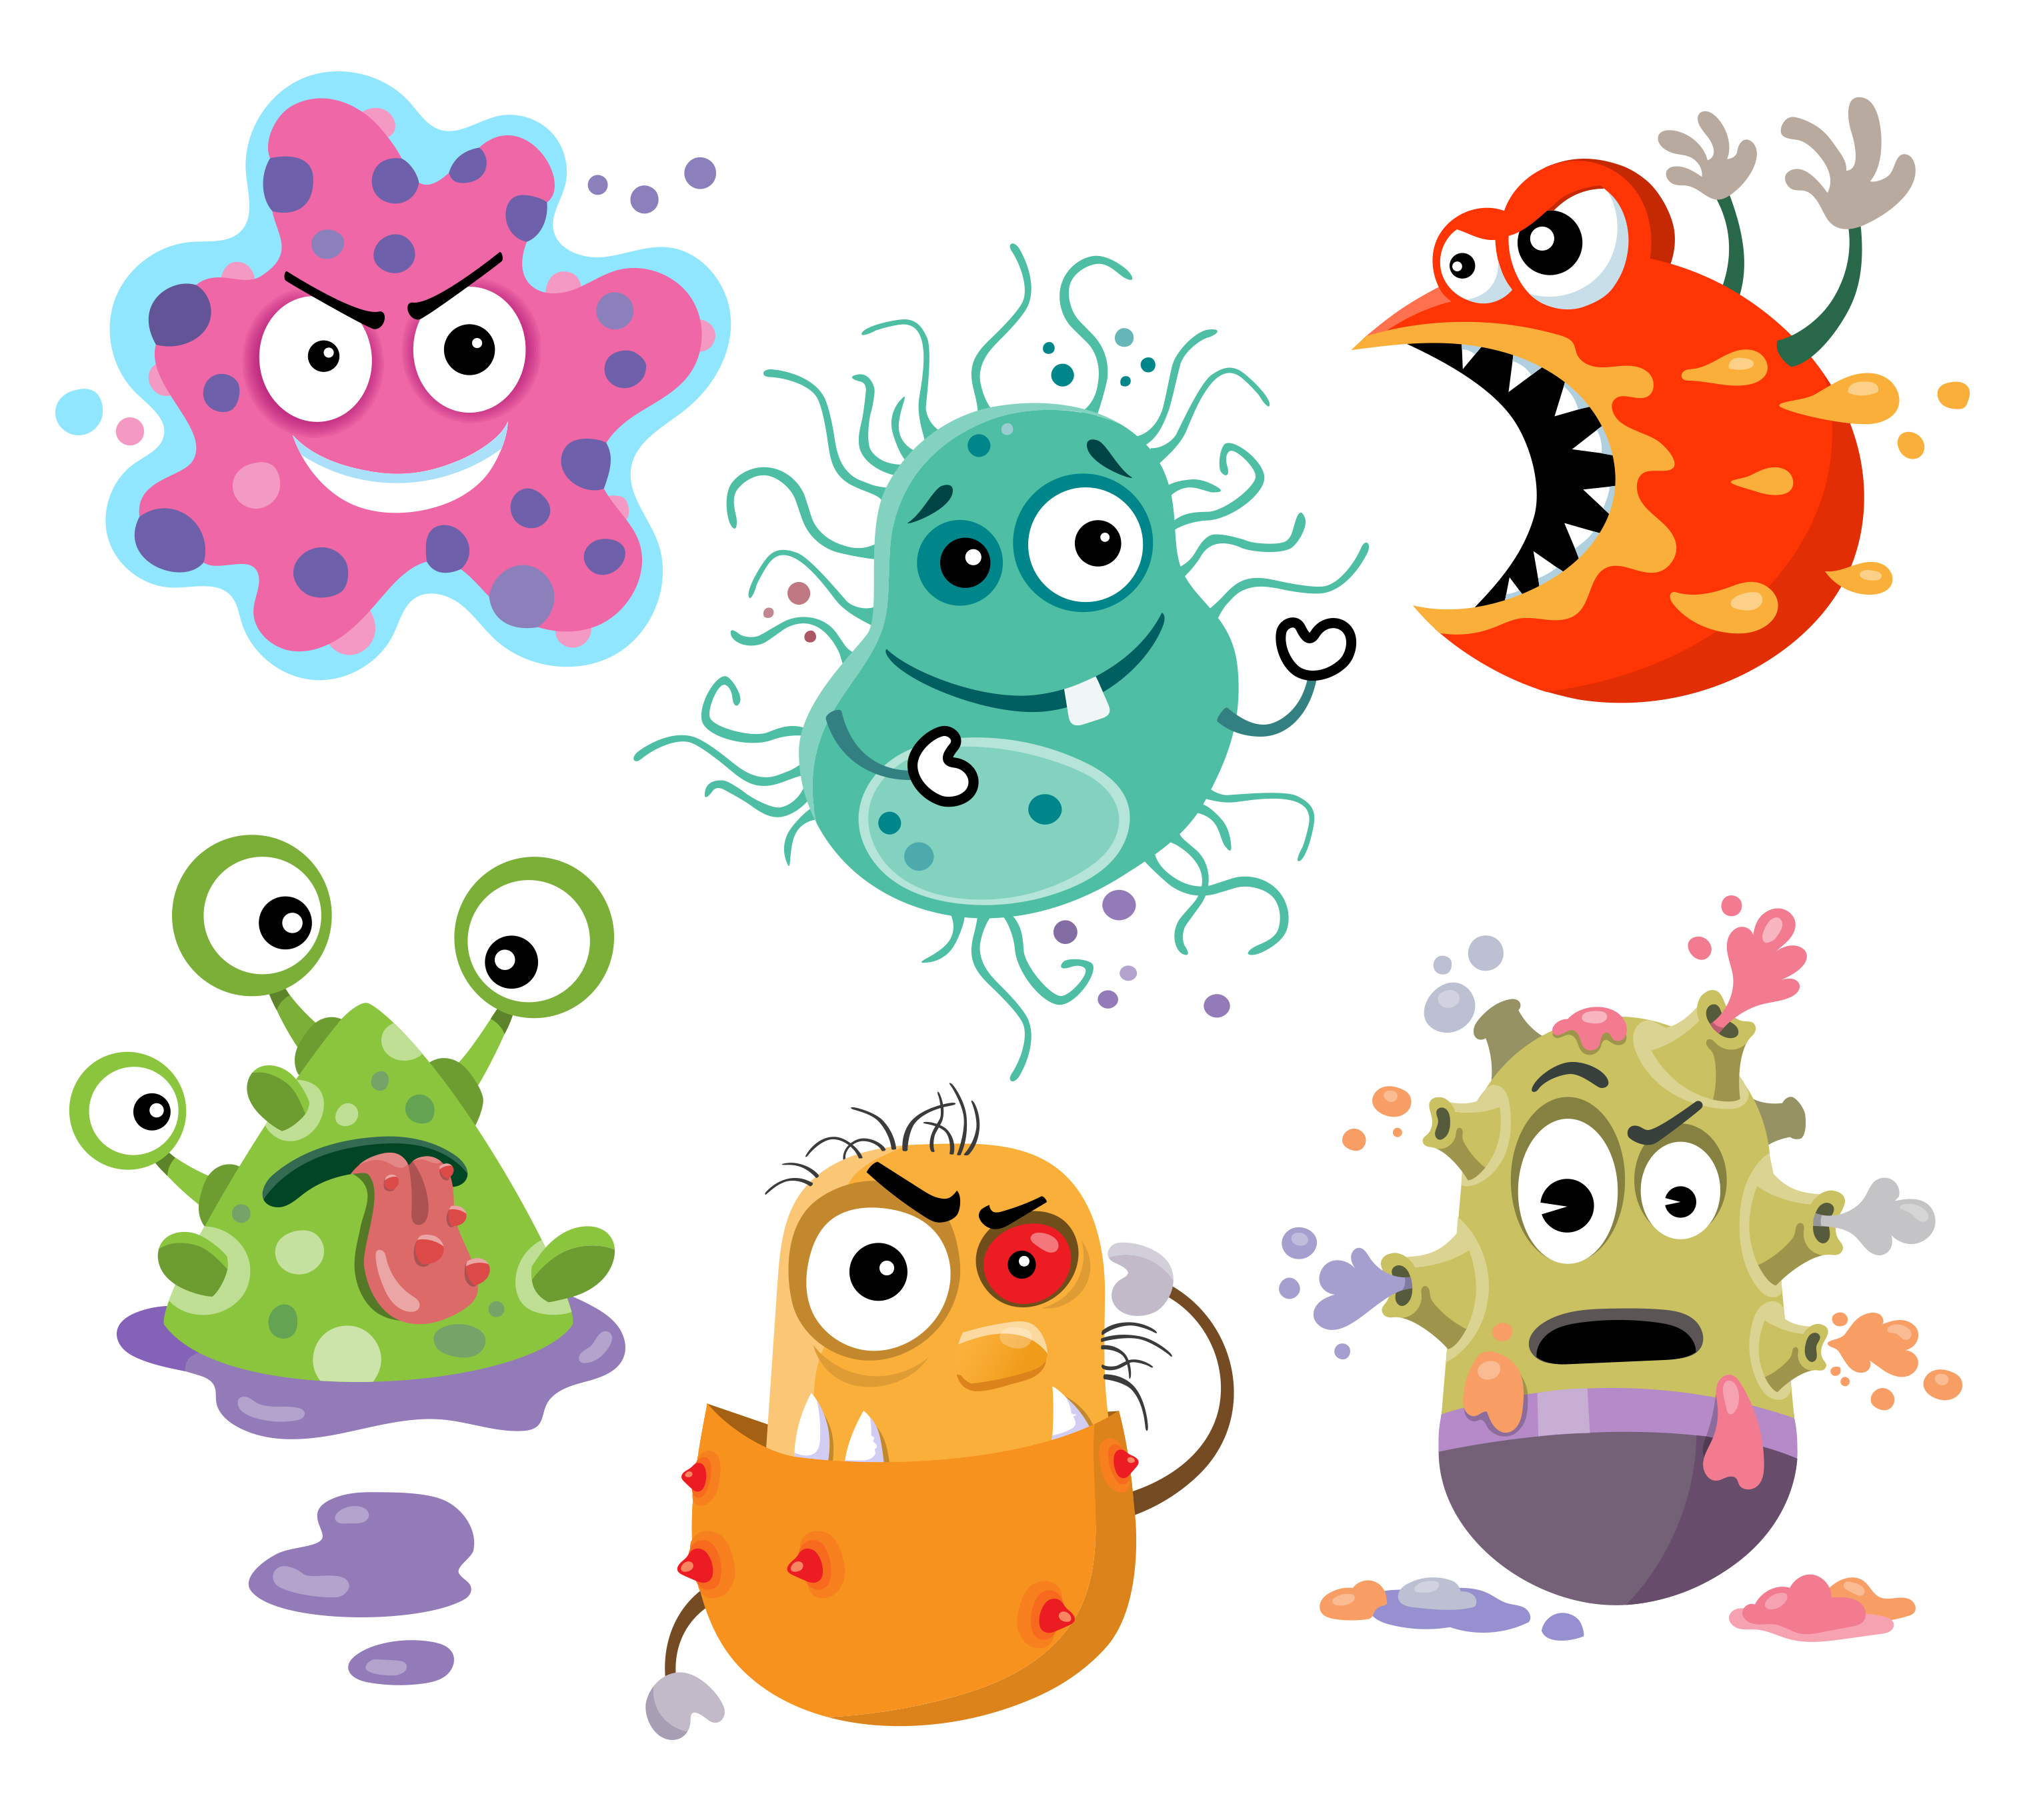 Are we more than. Bacteria clipart human